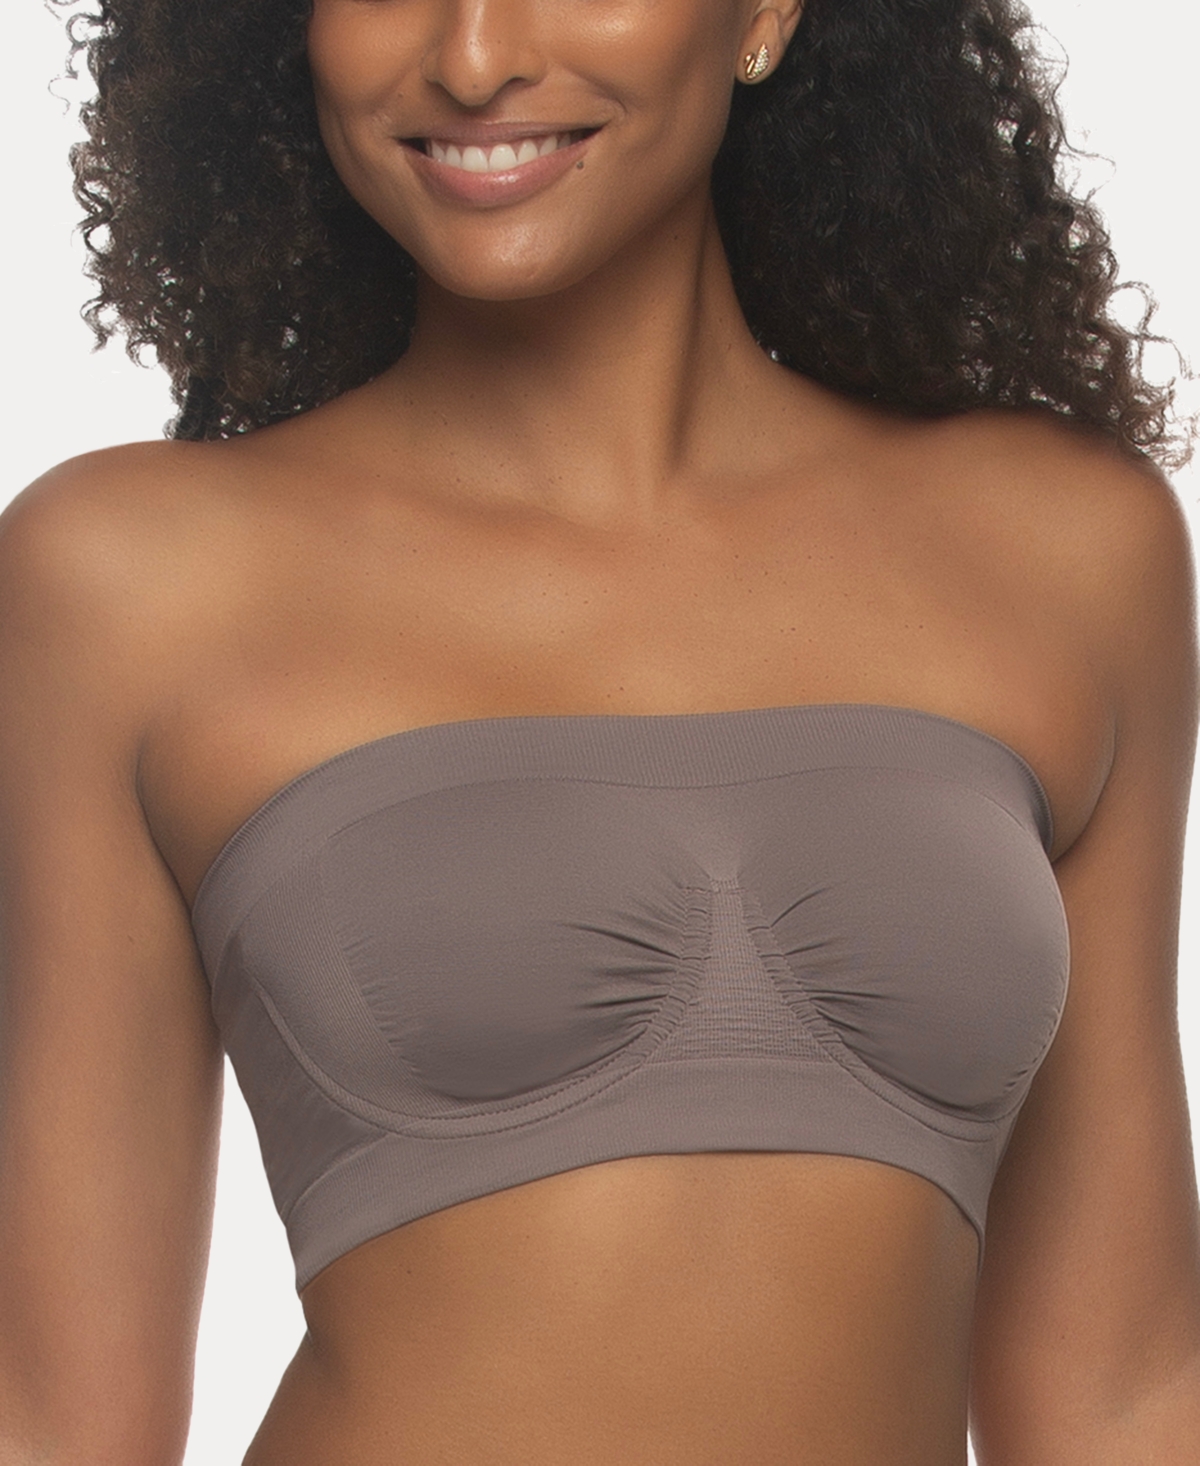 Paramour Plus Size Body Smooth Seamless Underwire Bandeau Bra In Sparrow